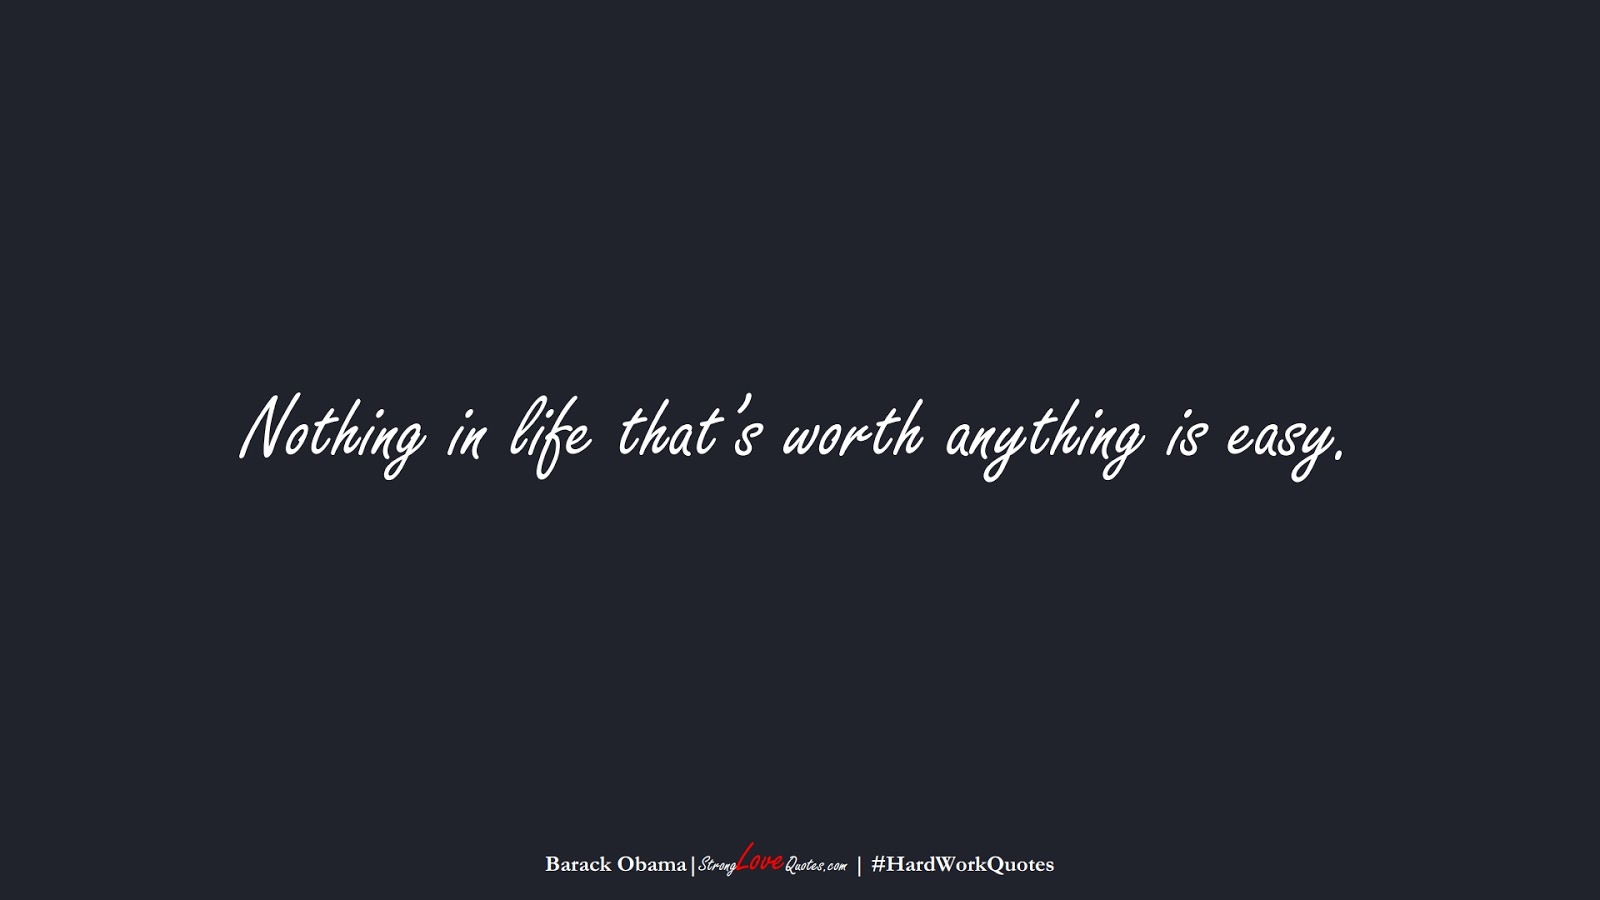 Nothing in life that’s worth anything is easy. (Barack Obama);  #HardWorkQuotes